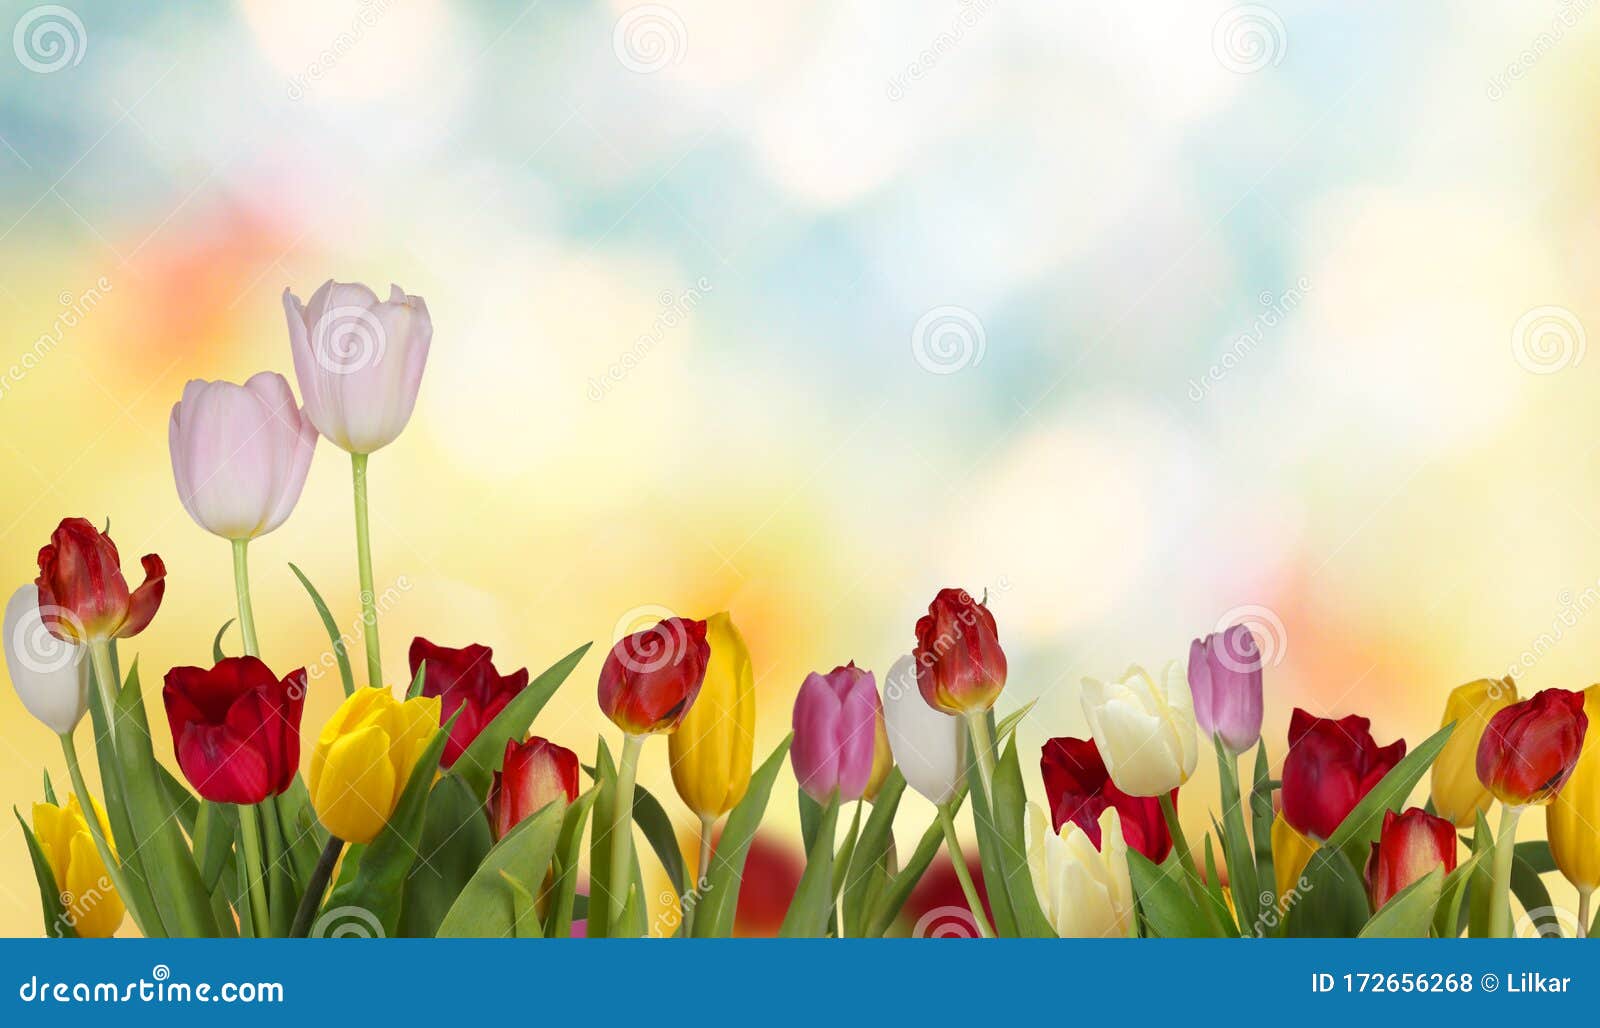 colorful fresh spring tulips flowers.nature background.